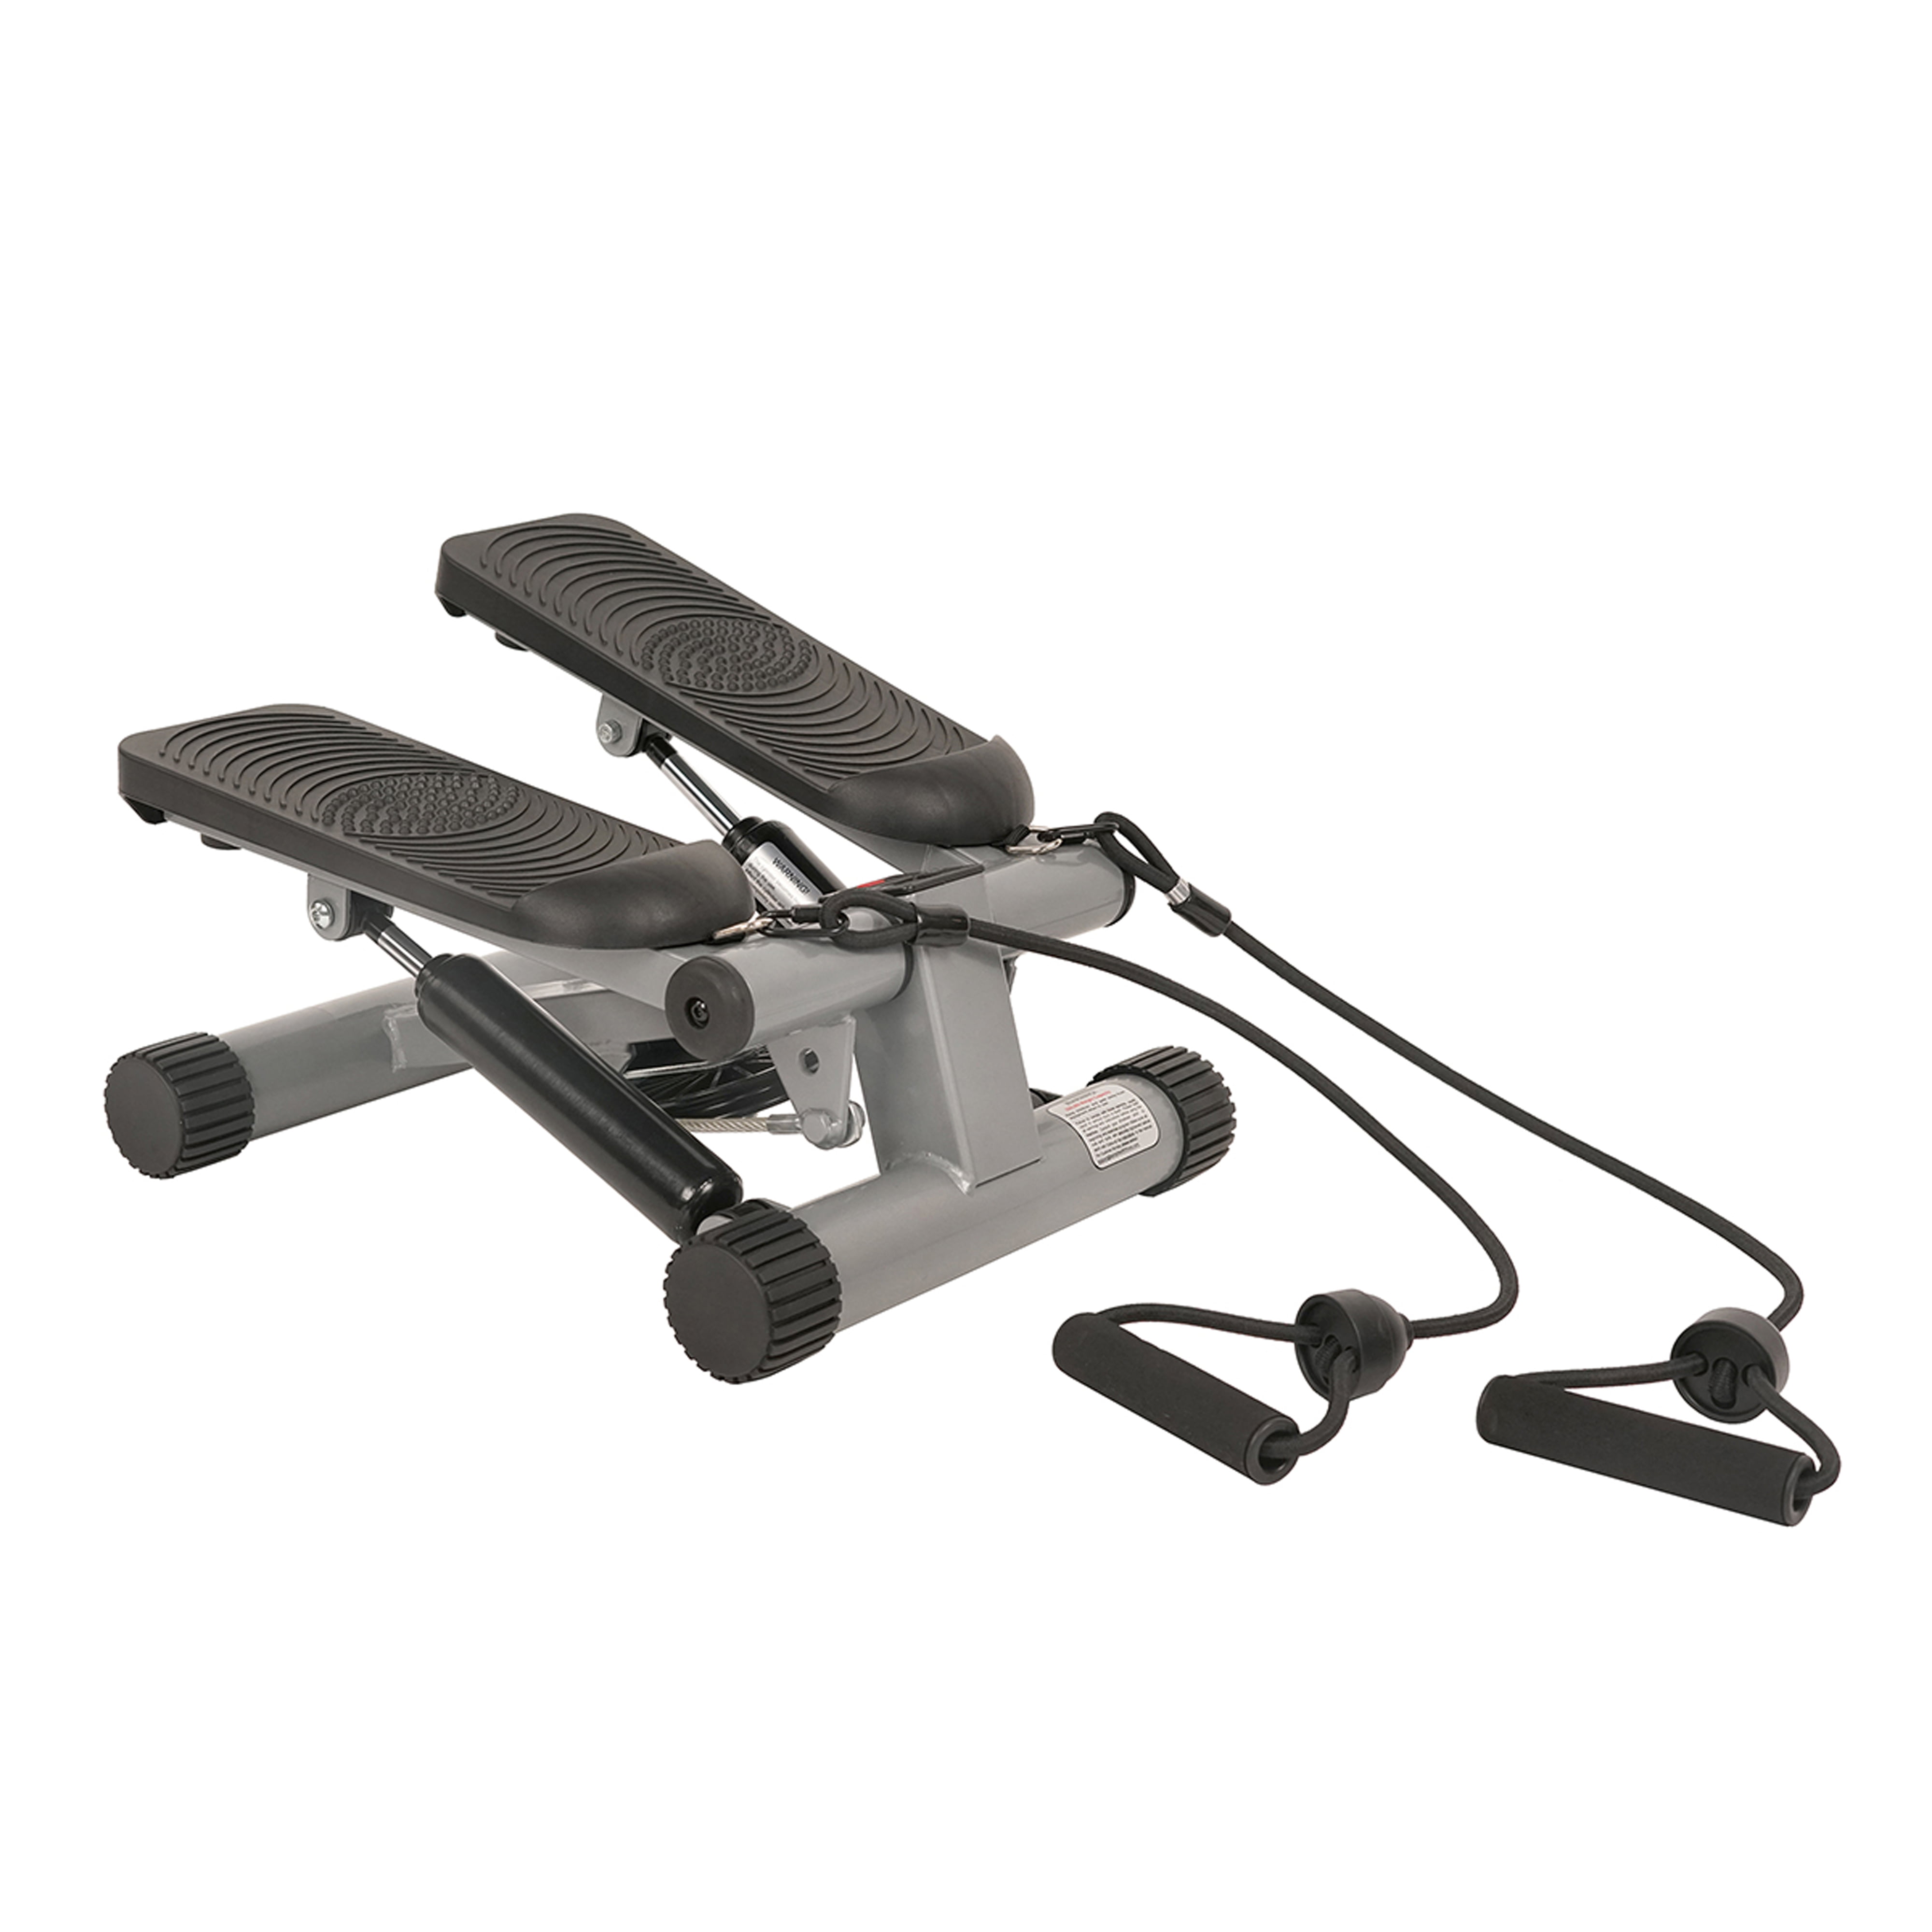 Details about   Exercise Stepper Including Resistance Bands-Mini Aerobic Stepper Machine&Display 